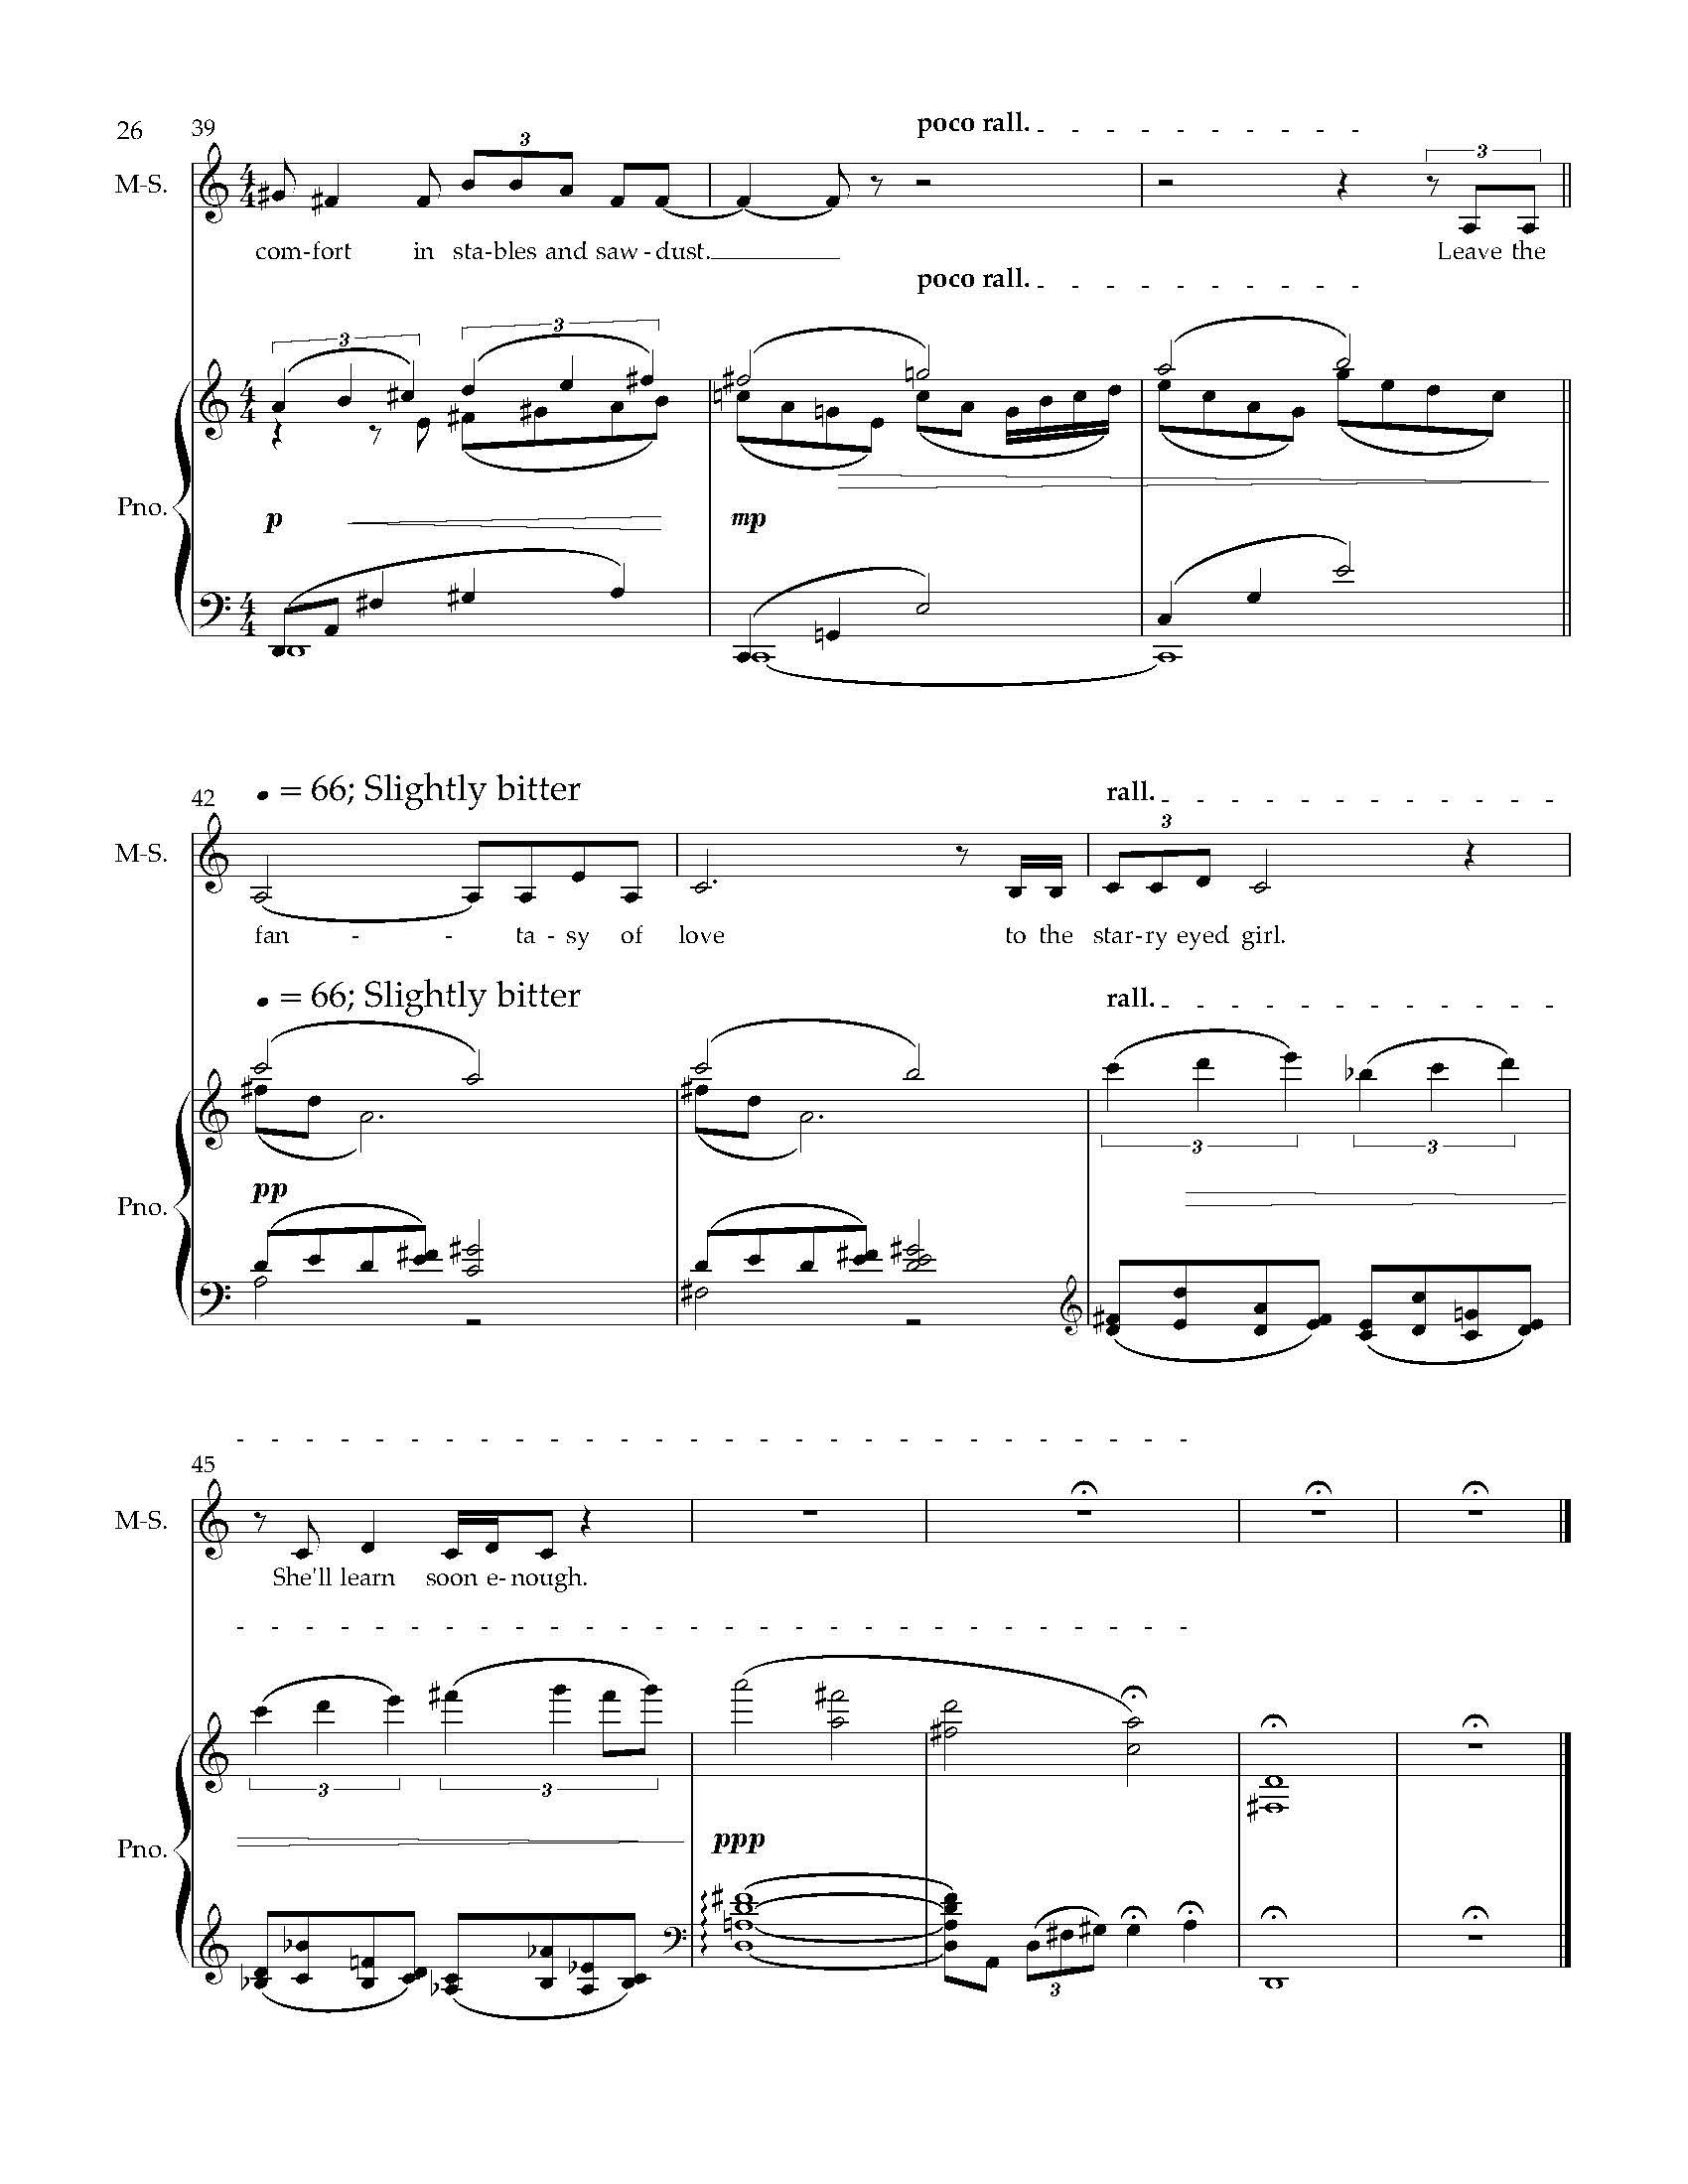 Five Arias from HWGS - Complete Score (1)_Page_30.jpg